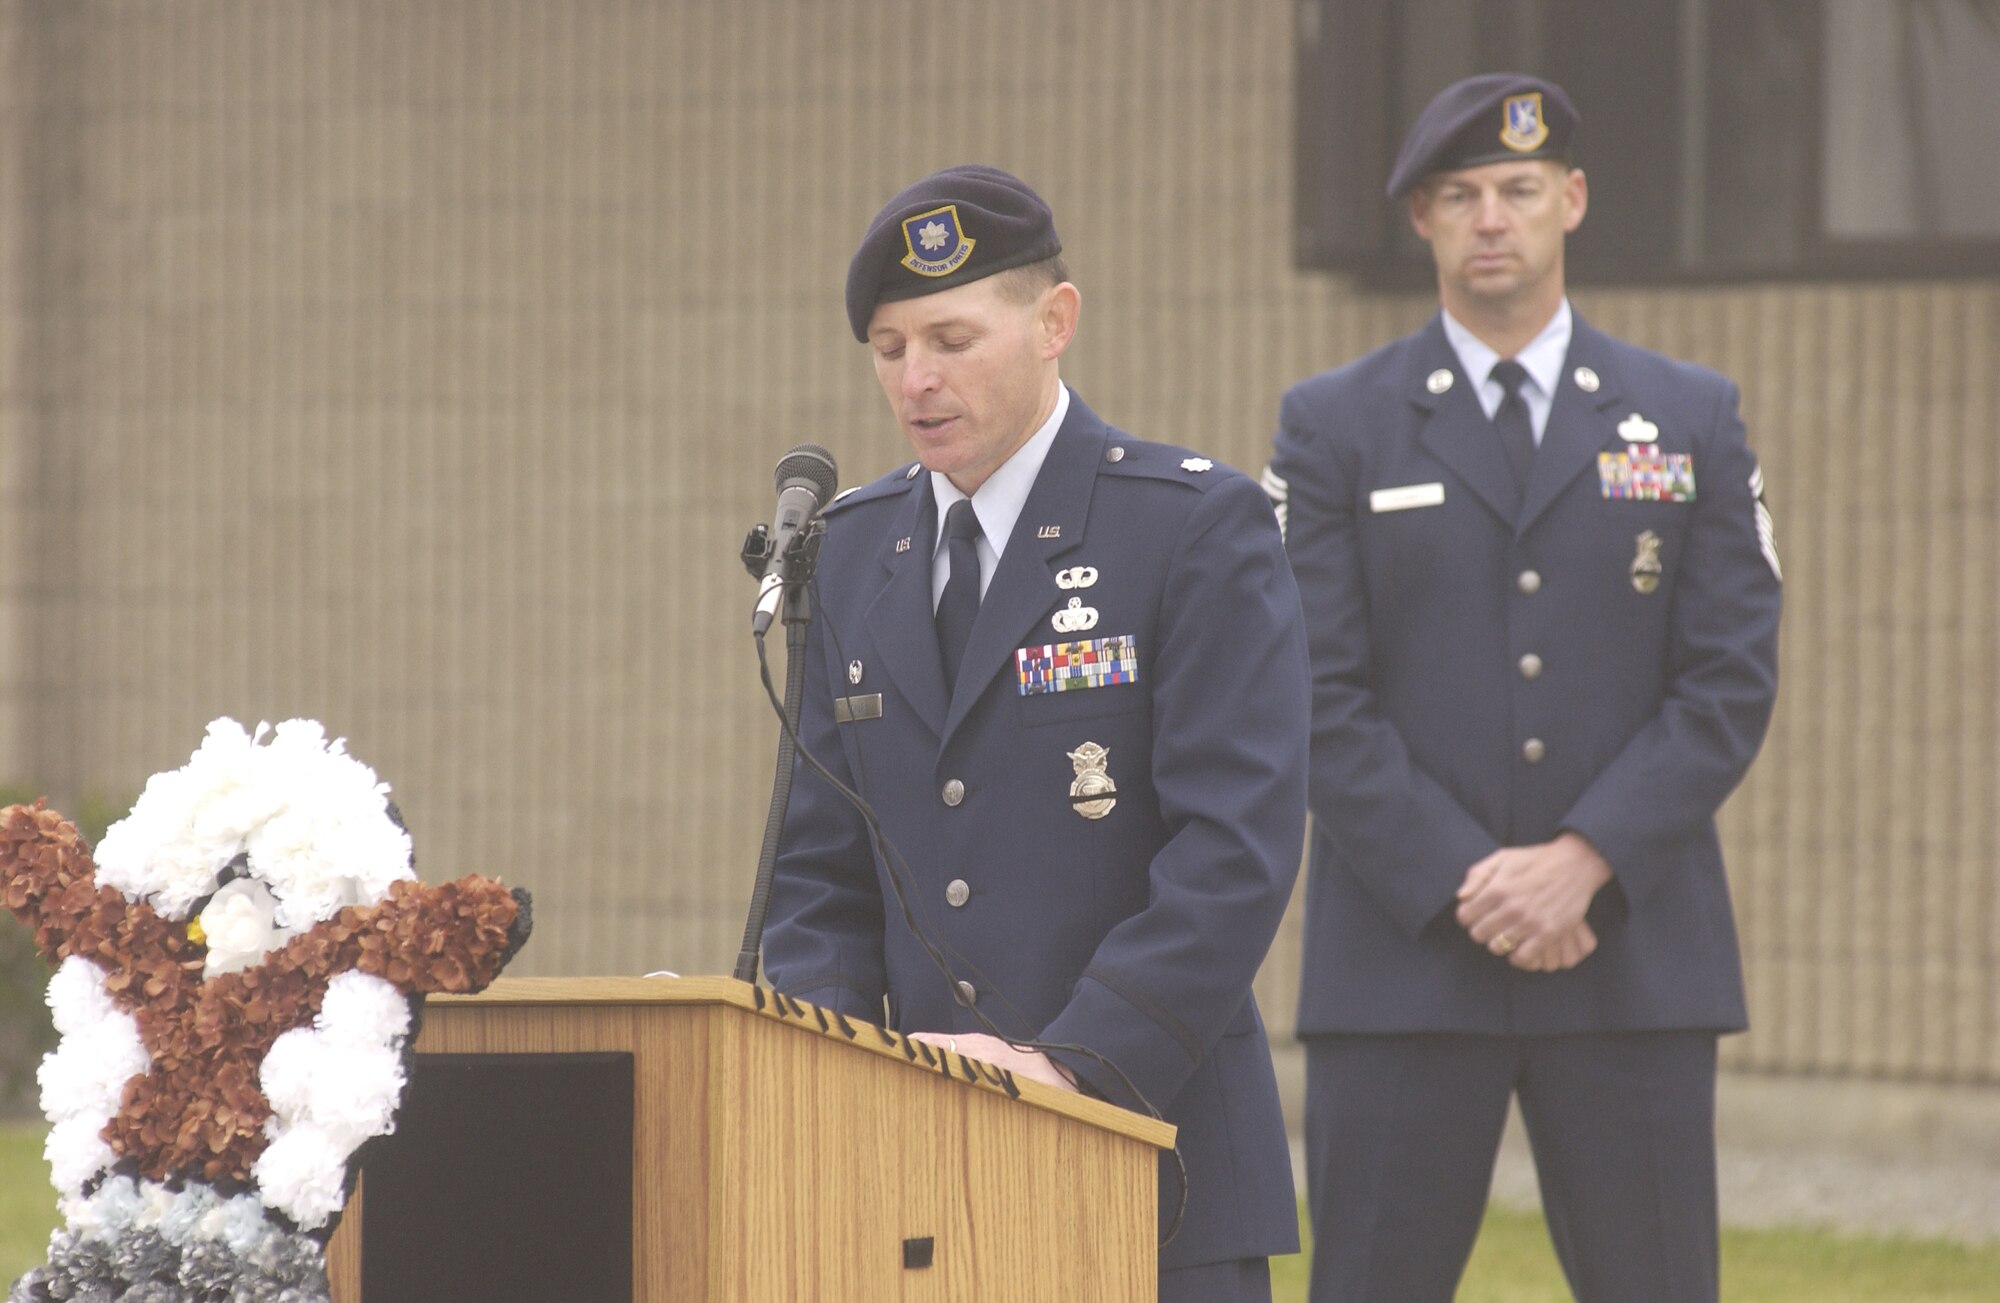 Lt. Col. Patrick Donley, 30th Security Forces Squadron Commander, delivers a speech at a Security Forces Memorial Ceremony to honor Cpl. David Williams, and Airman 1st Class Leebernard E. Chavis on May 14.  The Security Forces Memorial reflects names of fallen Airmen in the Security Forces career field who were killed in the line of duty. Cpl. Williams of Tamaqua Pennsylvania died March 4, 1951 in the line of duty while performing base security at Offut Air Force Base, NE.  Airman 1st Class  Chavis of Hampton, Virginia died October 14, 2006, while performing duties as a turret gunner with the 732nd Expeditionary Security Forces Squadron Det. 7 in Iraq. (U.S. Air Force photo by Airman 1st Class Adam Guy)